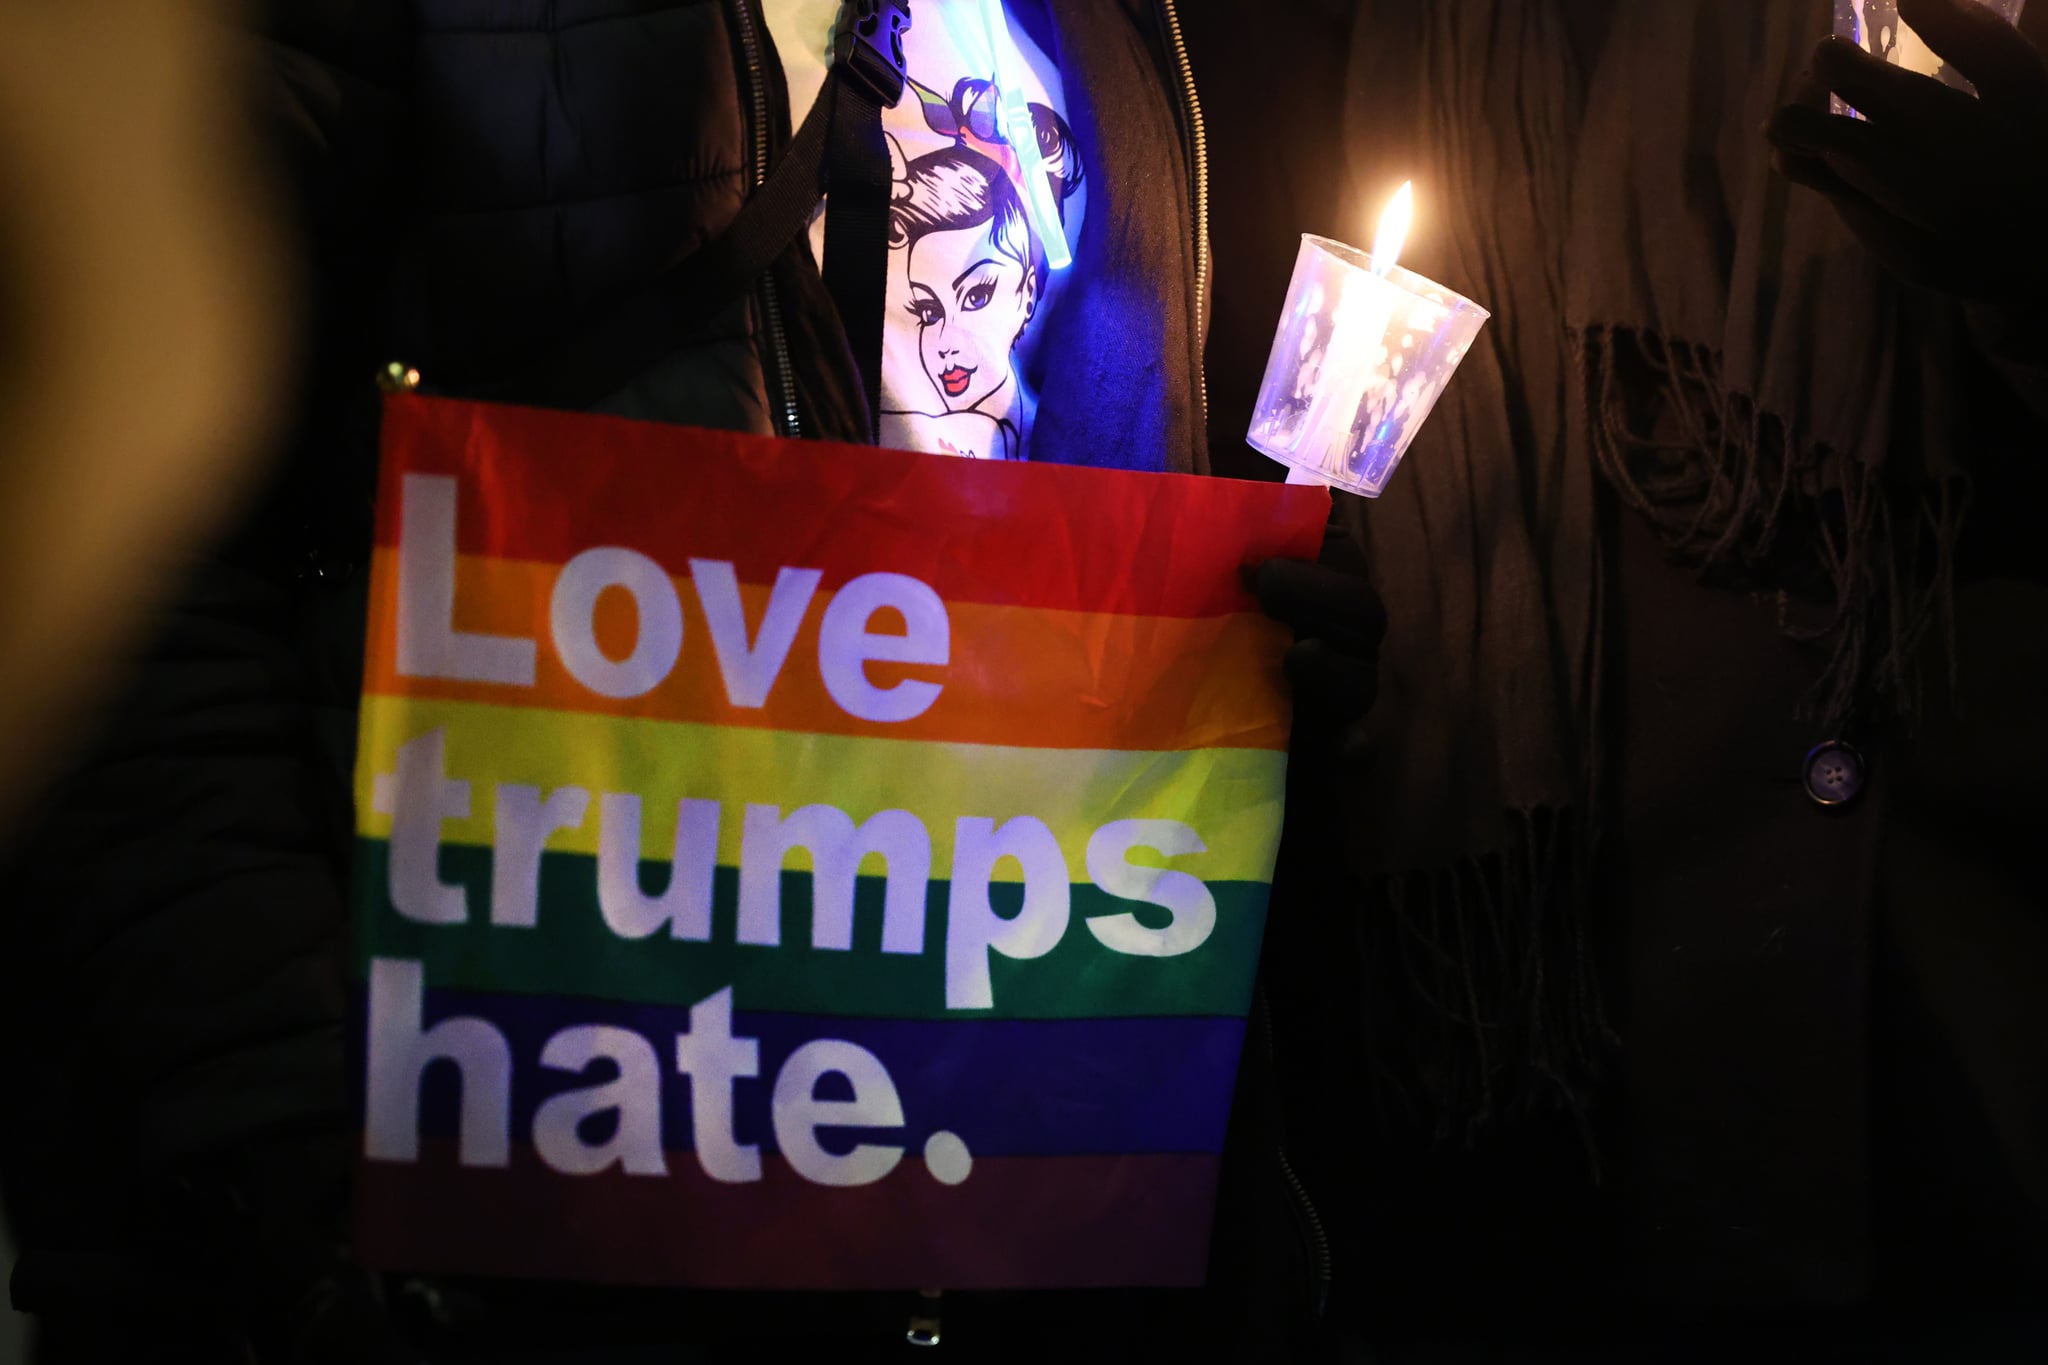 COLORADO SPRINGS, COLORADO - NOVEMBER 21: A woman holds a rainbow flag while visiting a makeshift memorial near the Club Q nightclub on November 21, 2022 in Colorado Springs, Colorado. On Saturday evening, a 22-year-old gunman entered the LGBTQ nightclub and opened fire, killing five people and injuring 25 others before being stopped by club patrons. (Photo by Scott Olson/Getty Images)